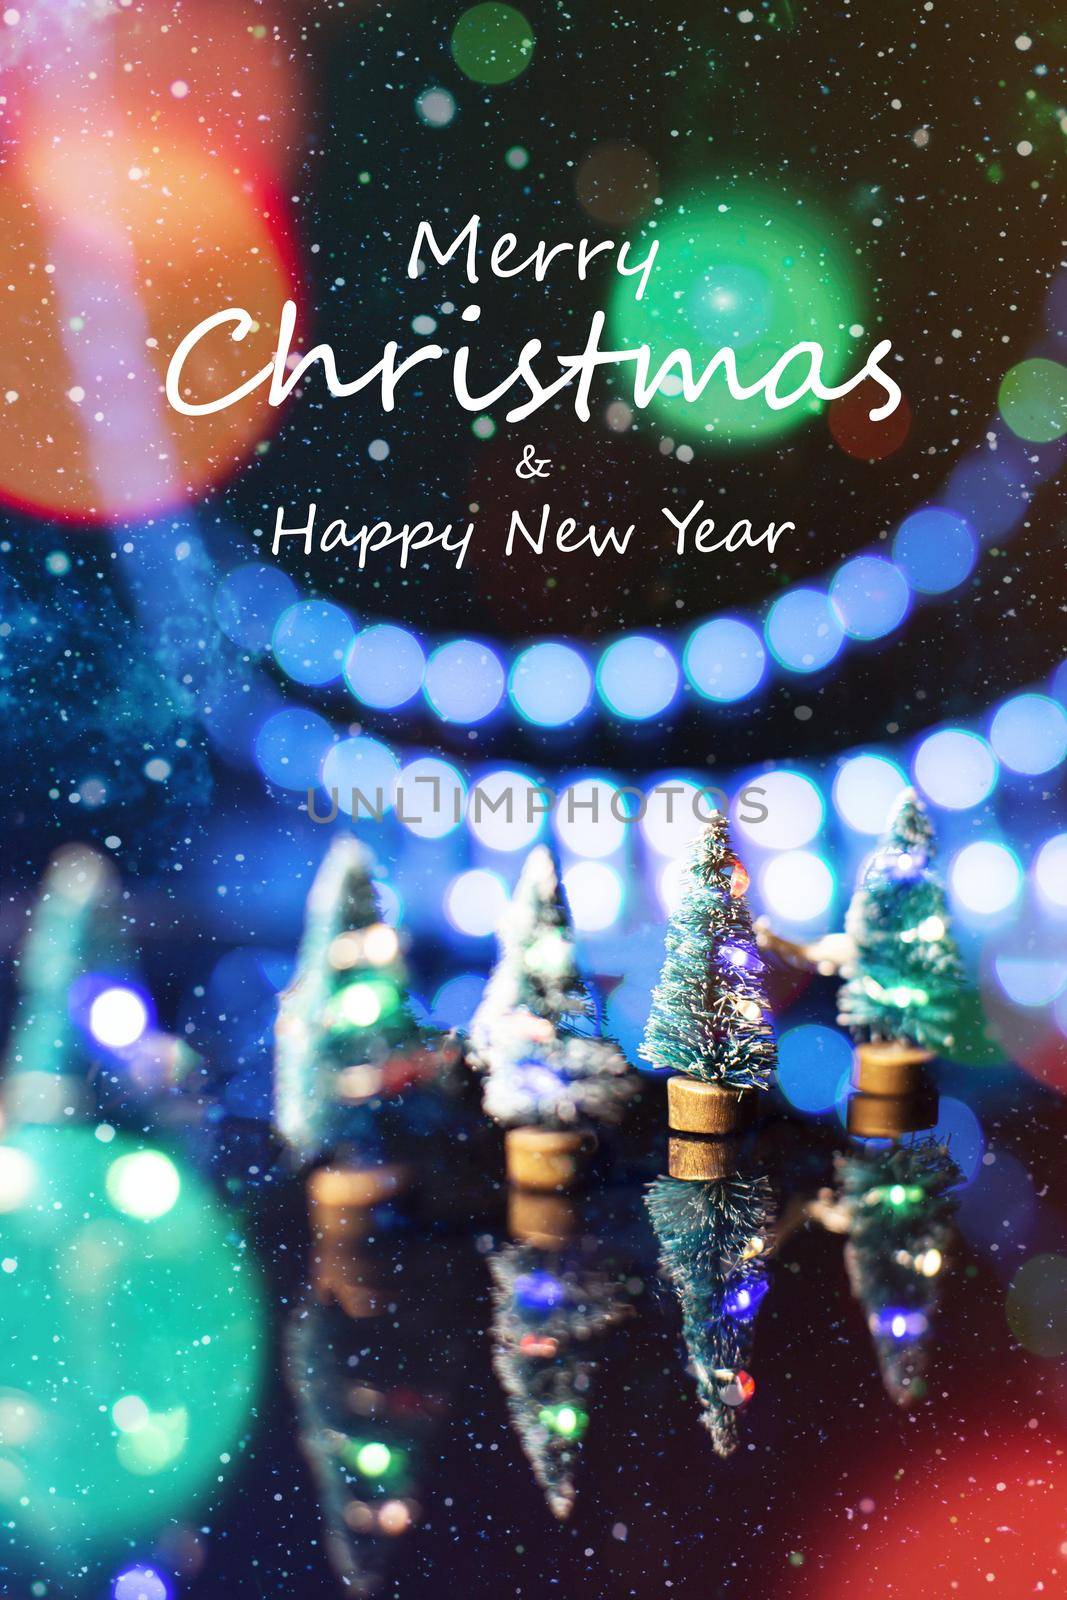 Merry Christmas & Happy New Year Text Design Over Magical Blue Defocused Bokeh Lights . Christmas Card with Glittering Festive Holiday Background